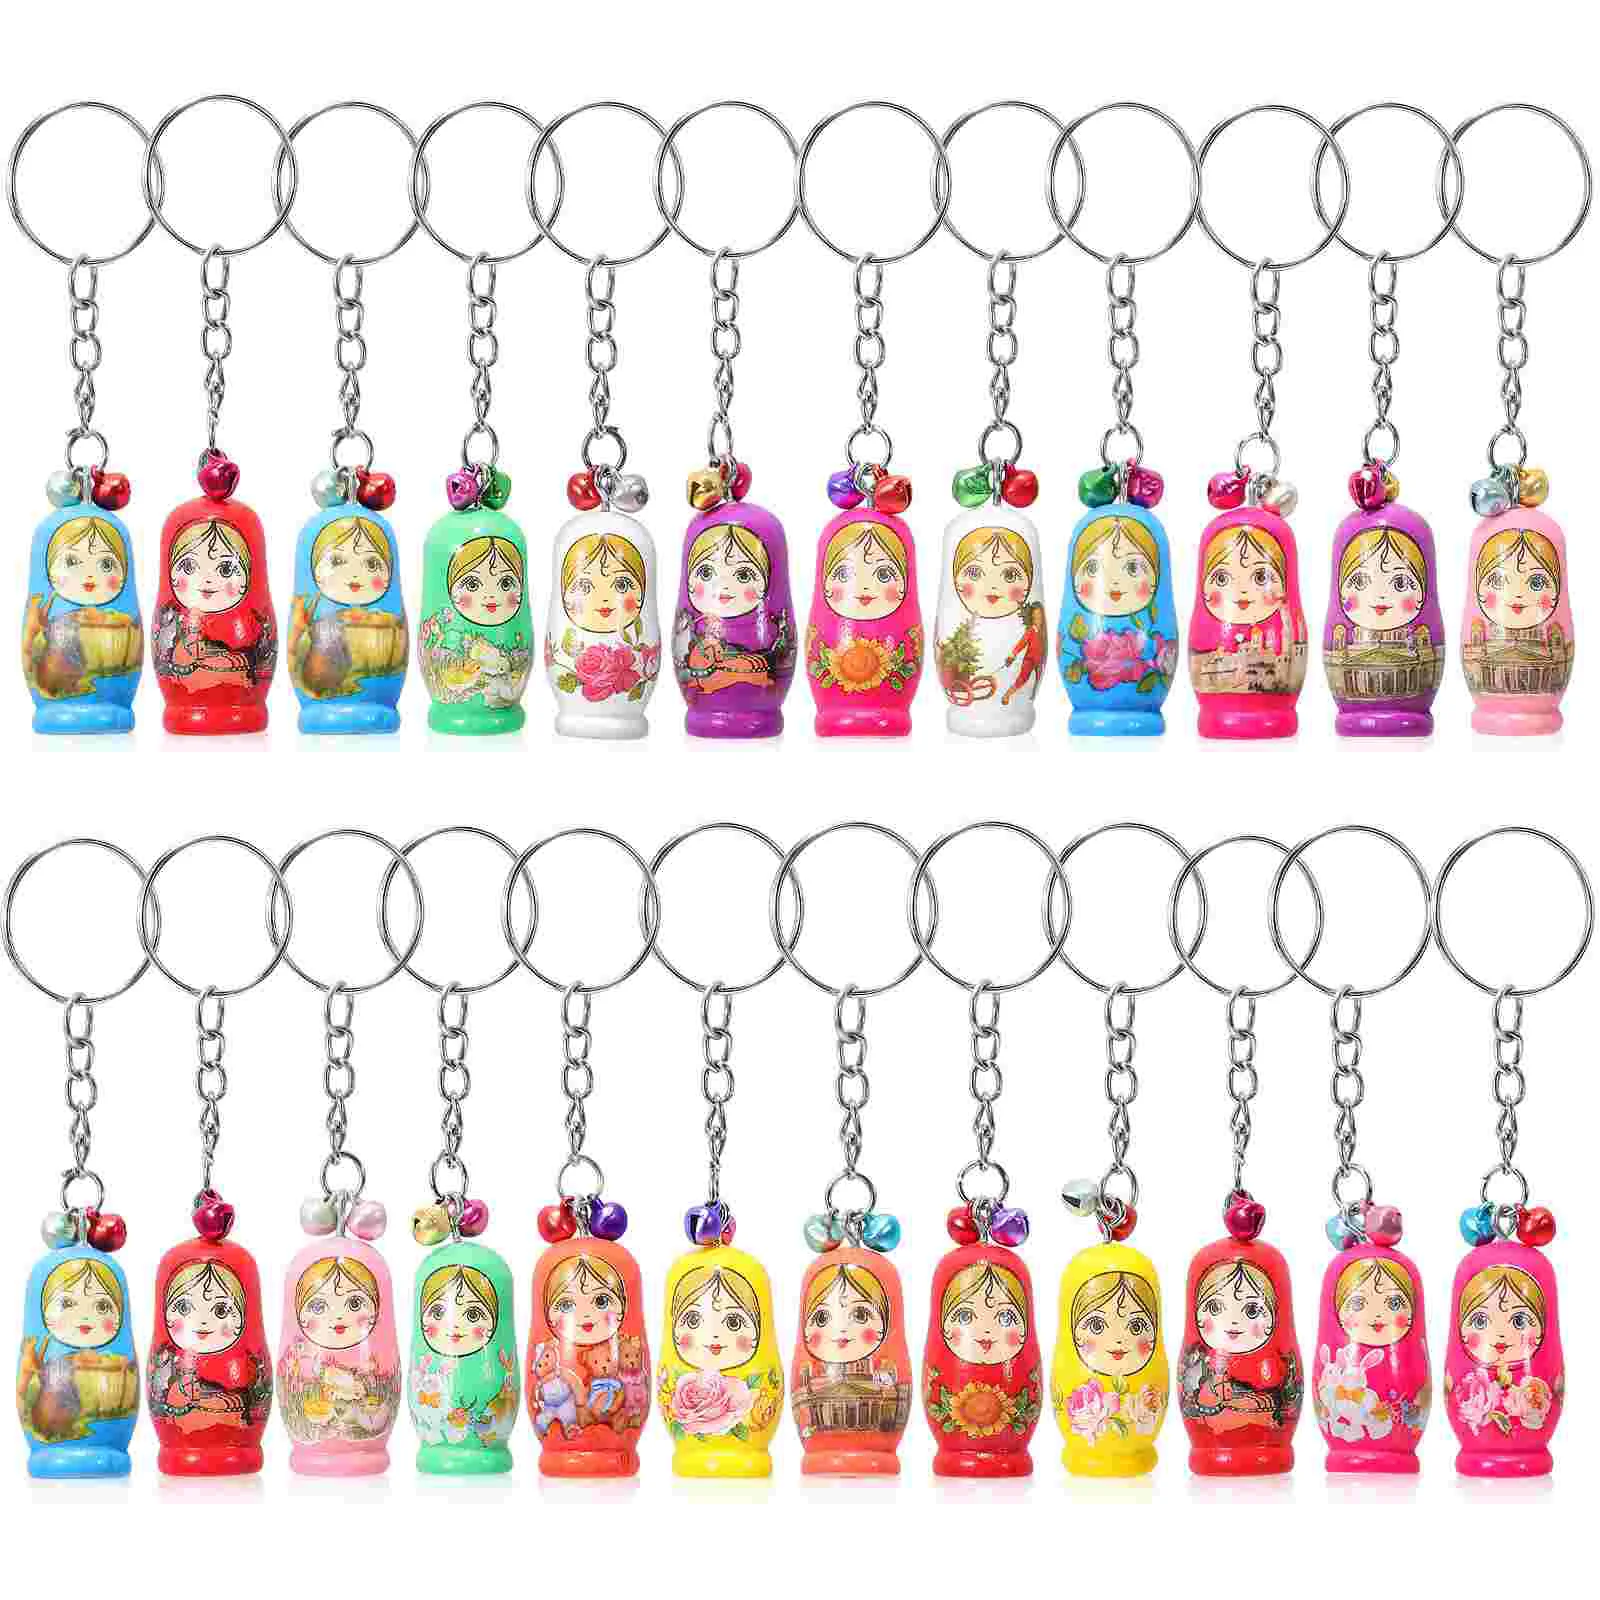 

24 Pcs Russian Nesting Dolls Keychains with Small Bells Stacking Toys Pendants Key Rings Creative Keychains Charm Decors